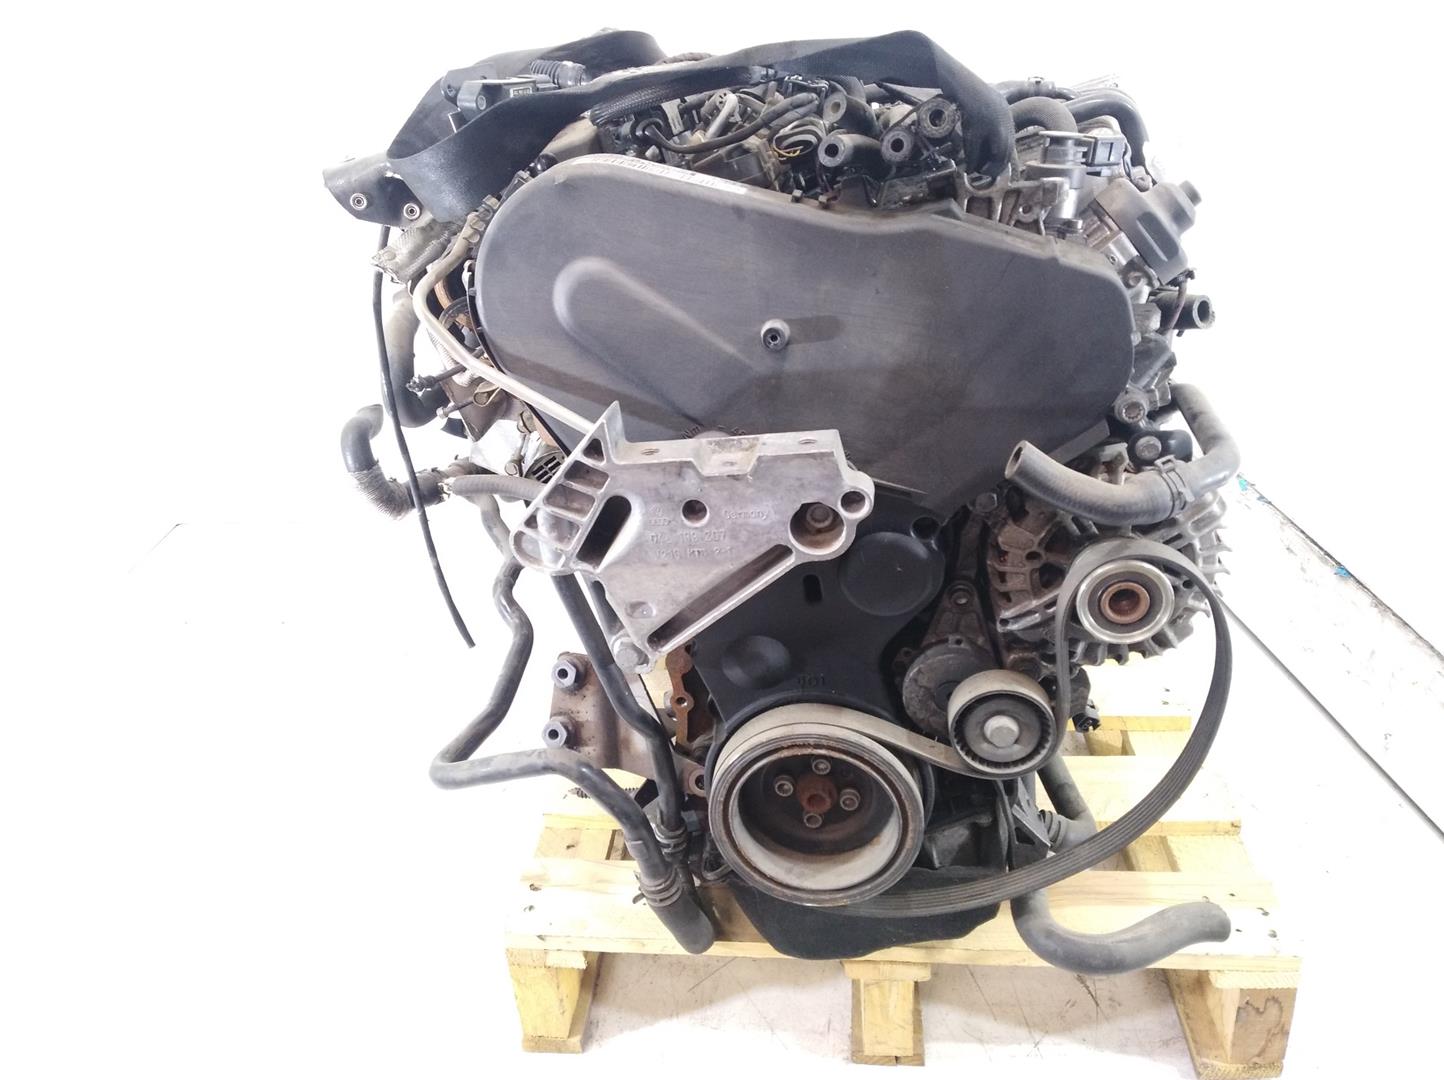 SEAT Leon 3 generation (2012-2020) Engine CLH, CLH, CLH 24667825